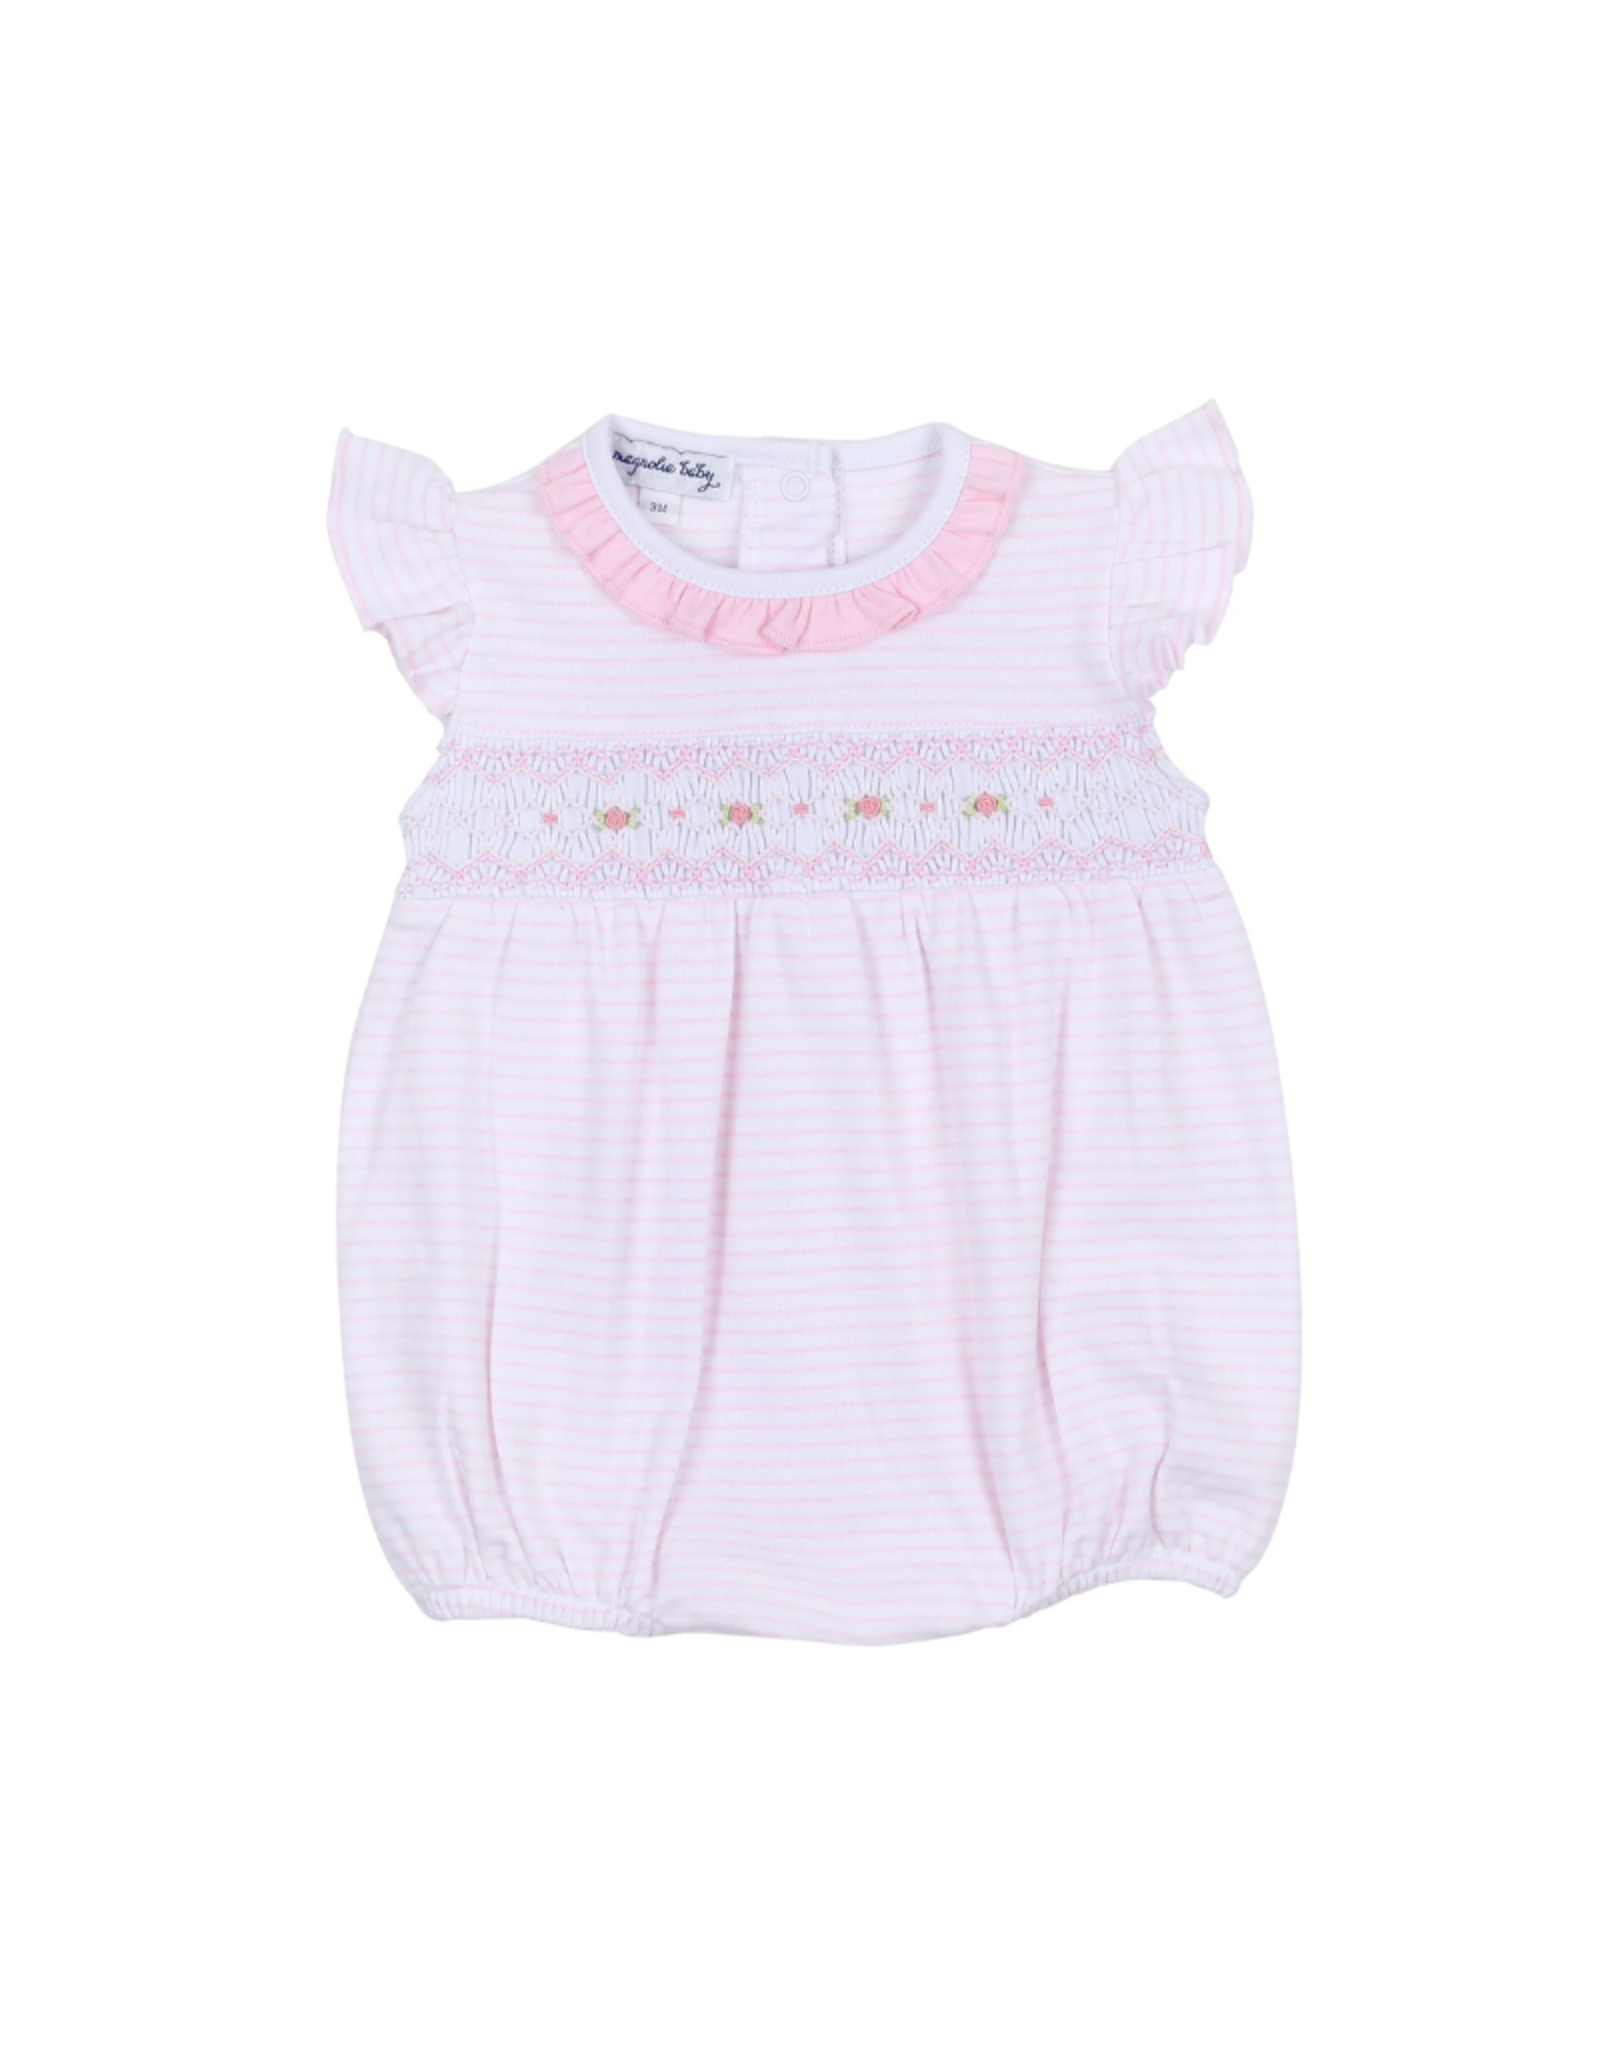 Magnolia Baby Katie & Kyle Pink Smocked Ruffle Flutters Bubble